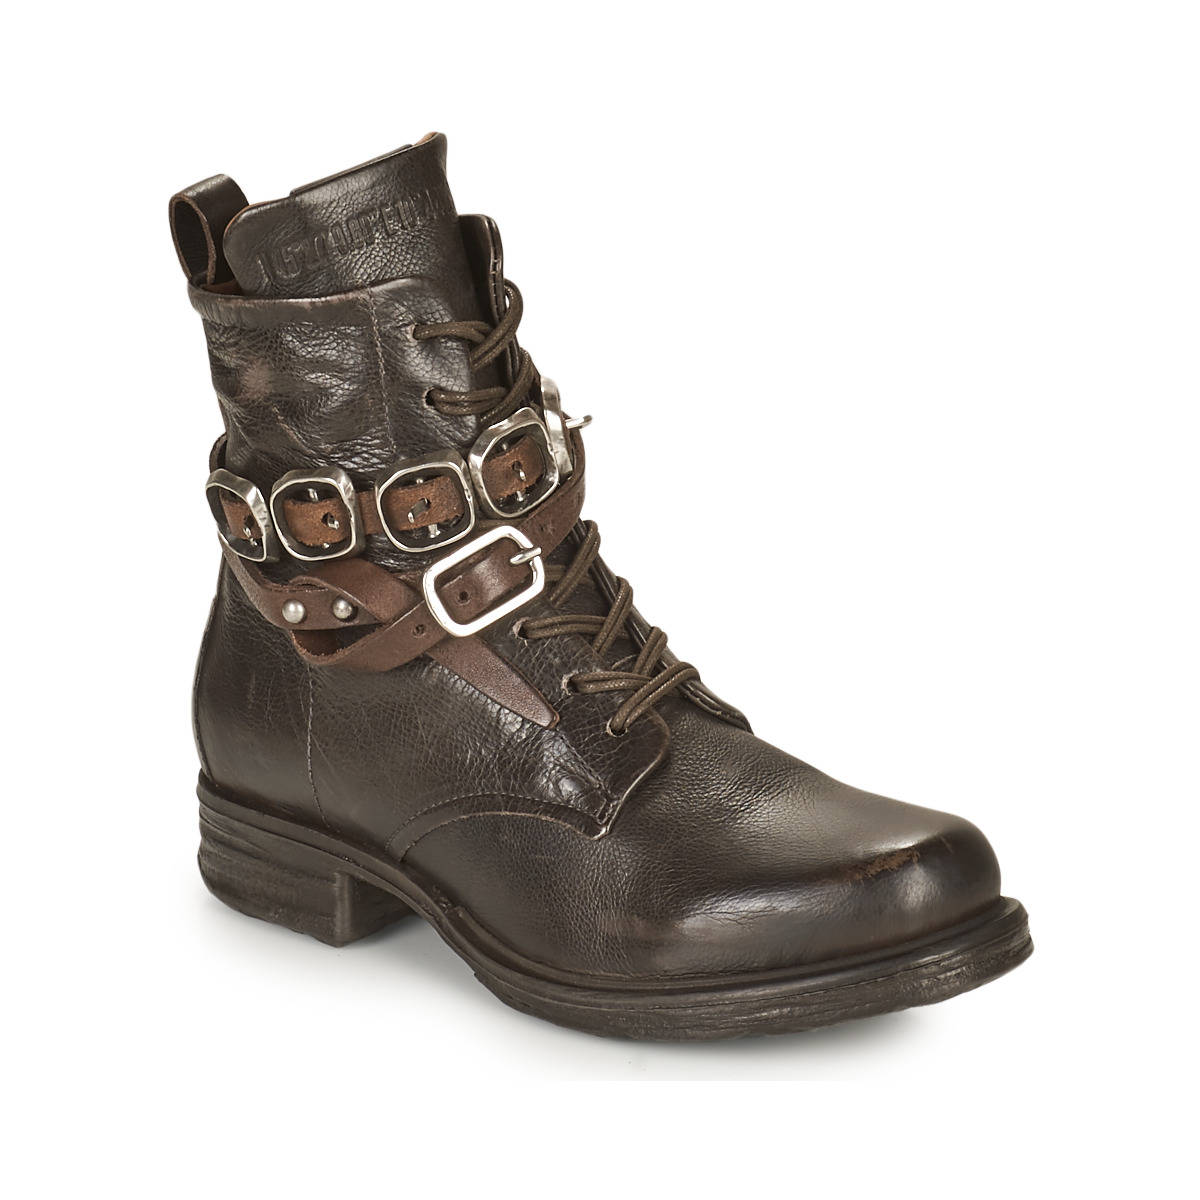 airstep / a.s.98  saintec bride  women's mid boots in brown